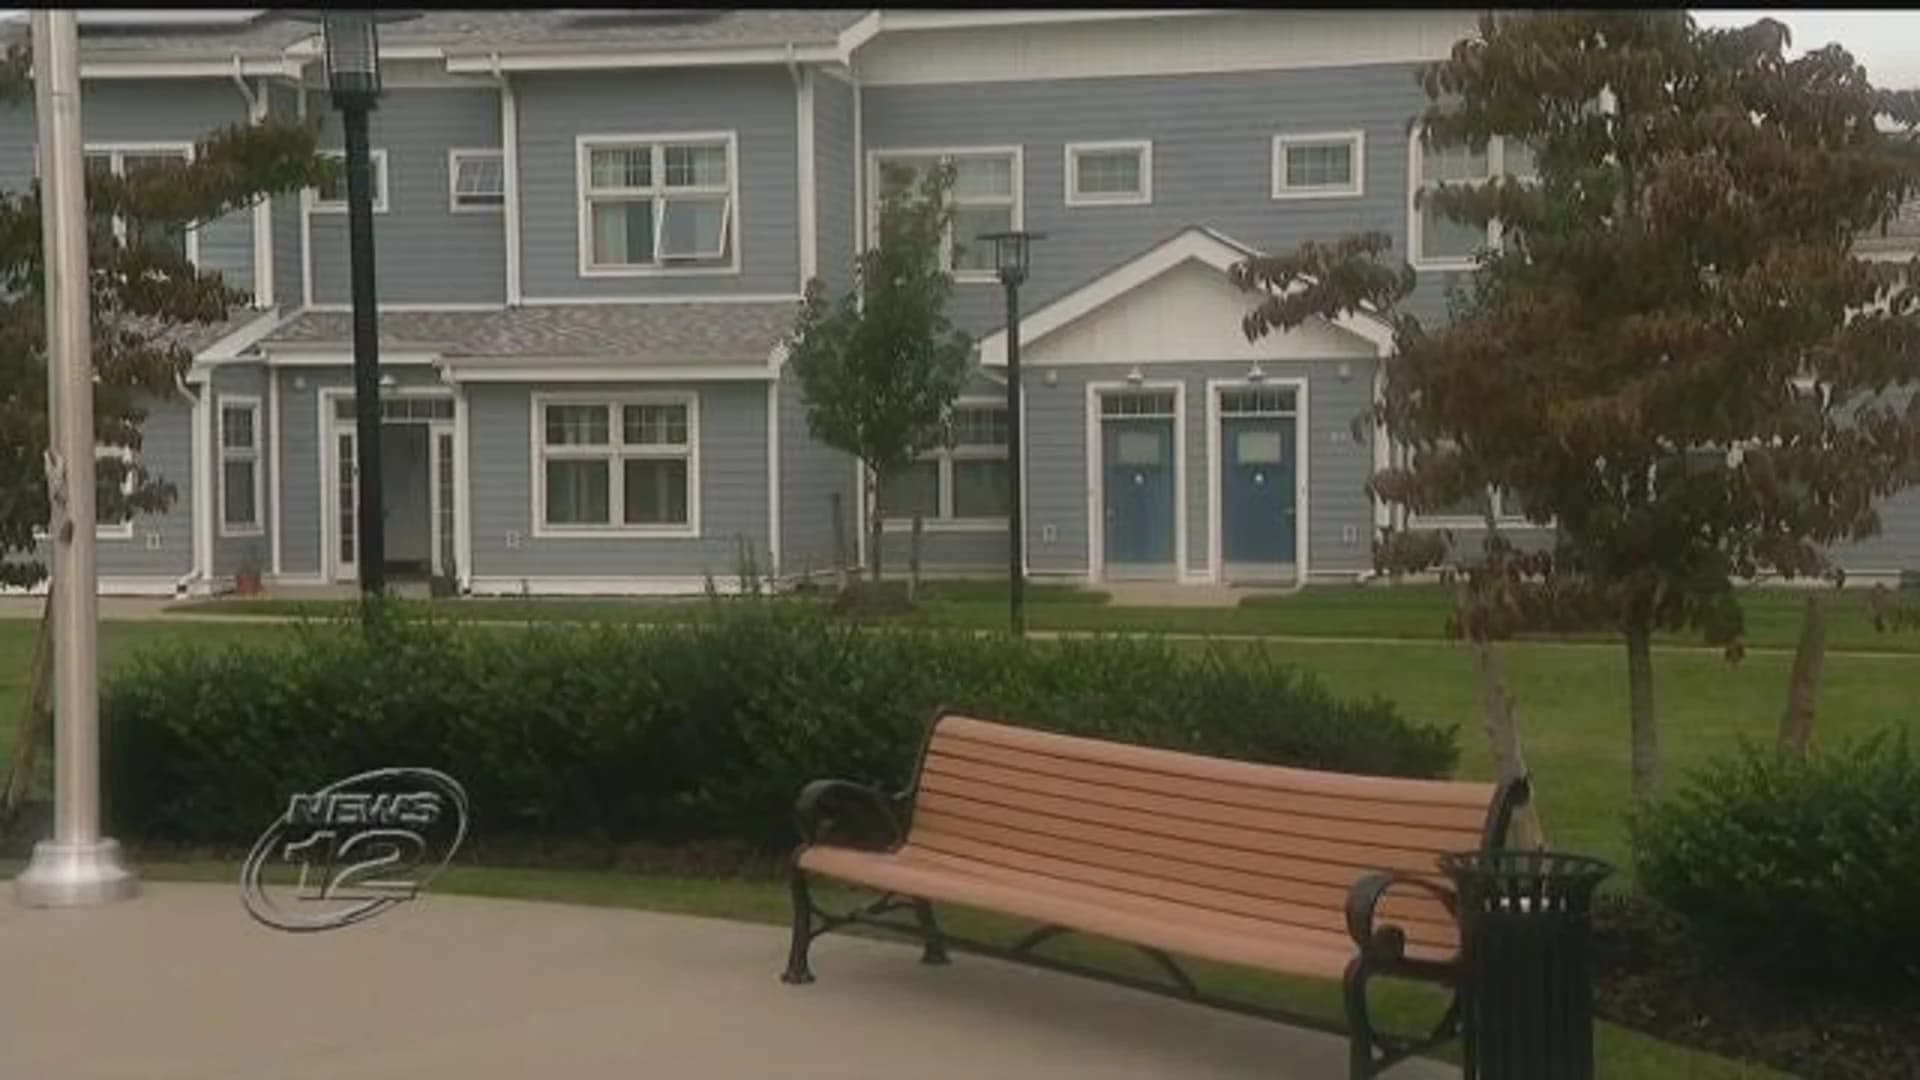 Report: Critical shortage of affordable housing in Suffolk